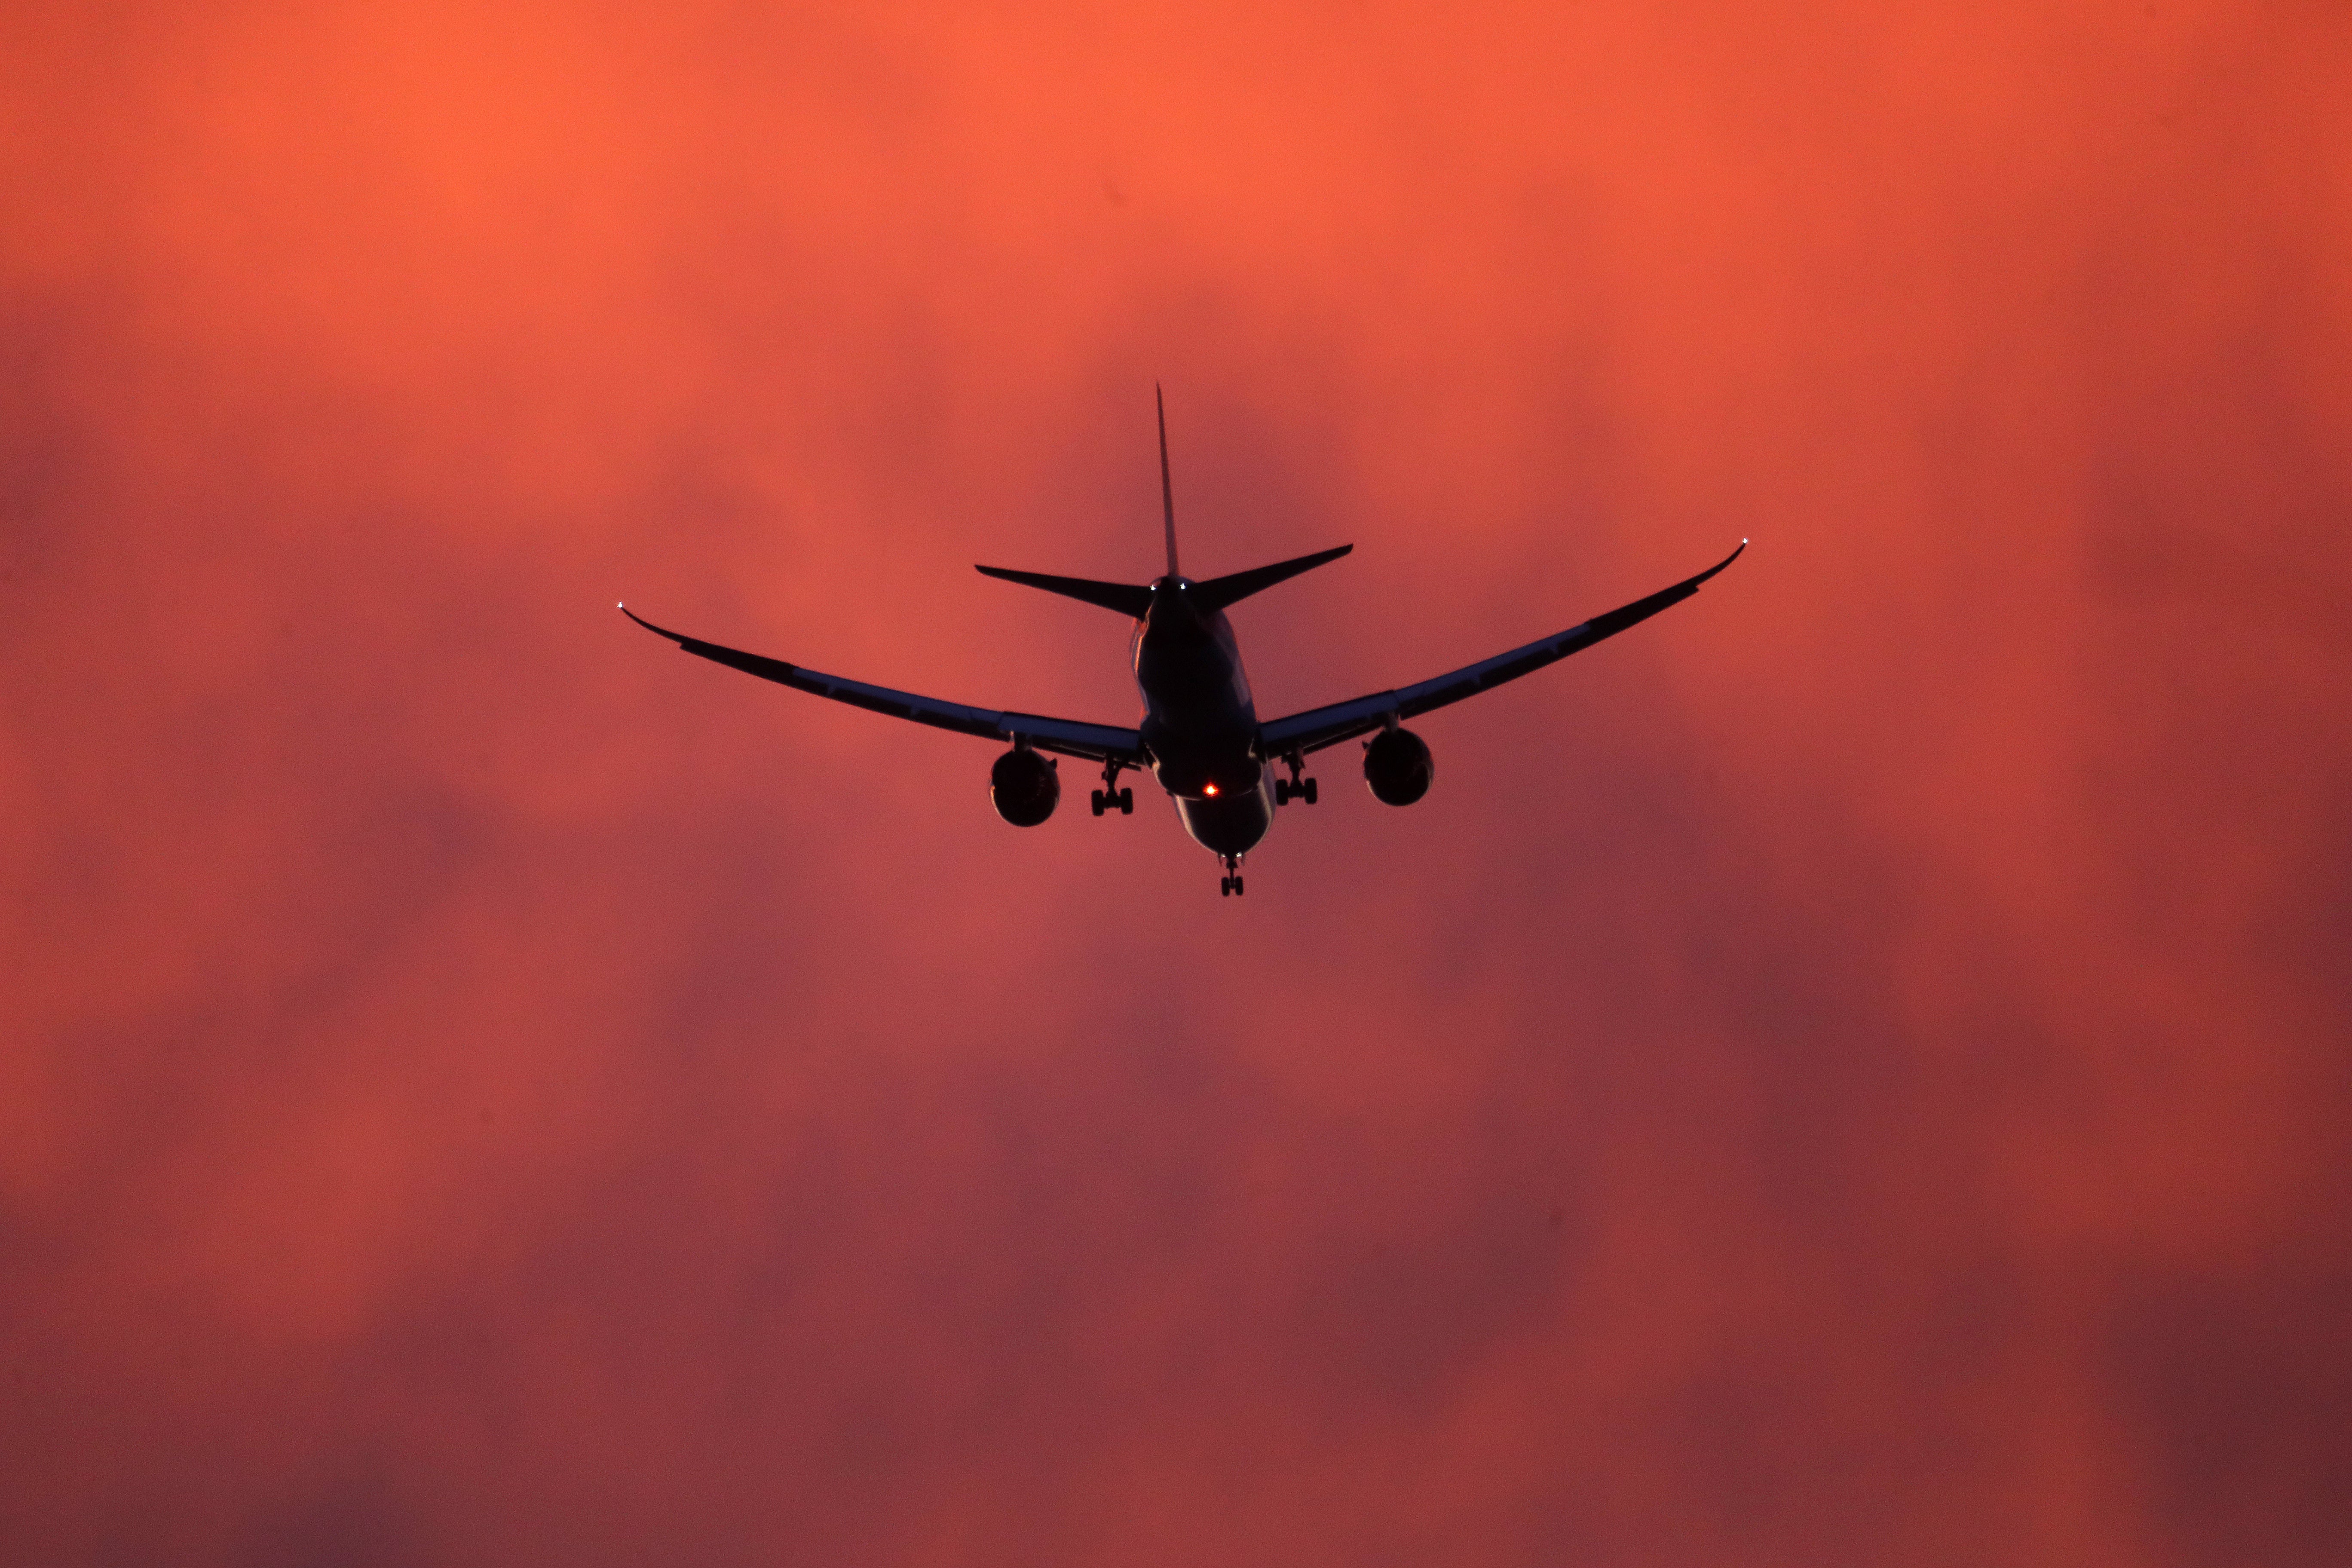 UK’s climate advisers have said there should be no new net airport expansion if the country is to meet its target of reaching net-zero emissions by 2050